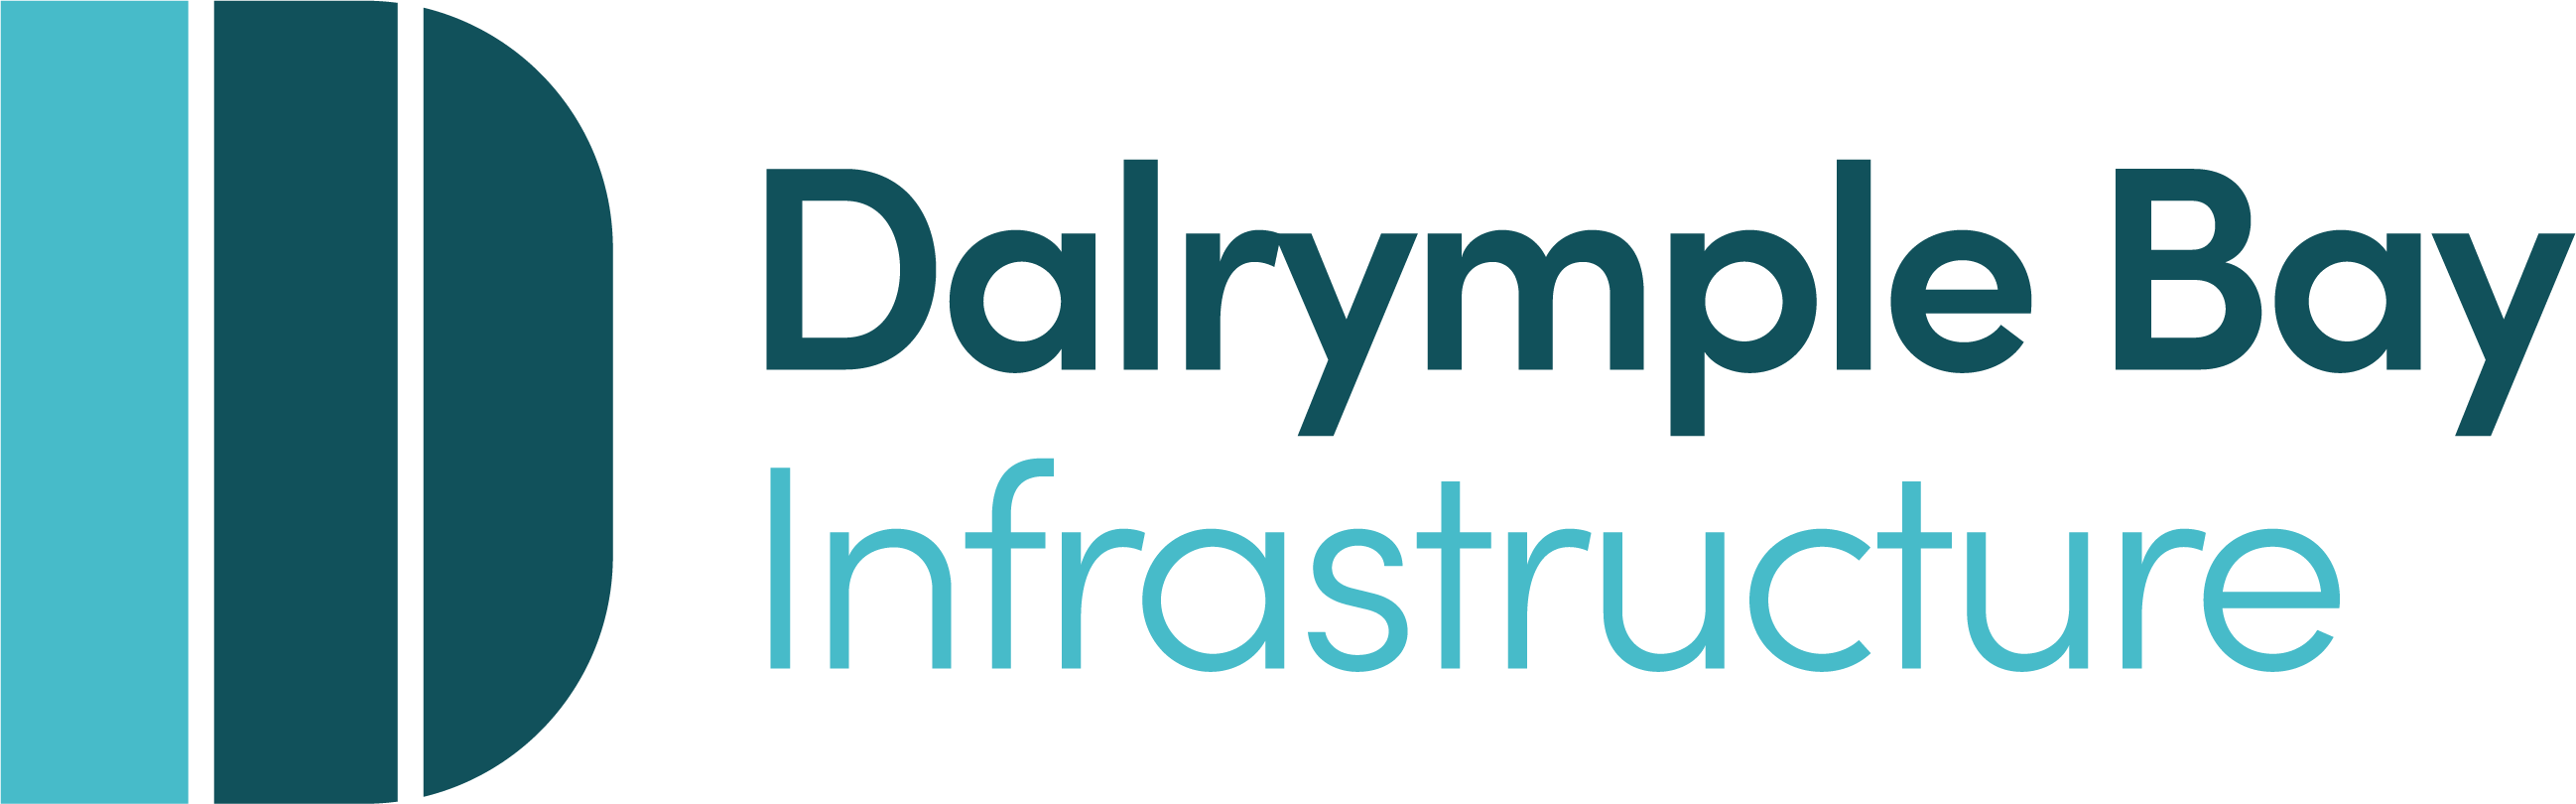 Dalrymple Bay Infrastructure Ltd Stapled (Ordinary Share , Unsecured note) Logo